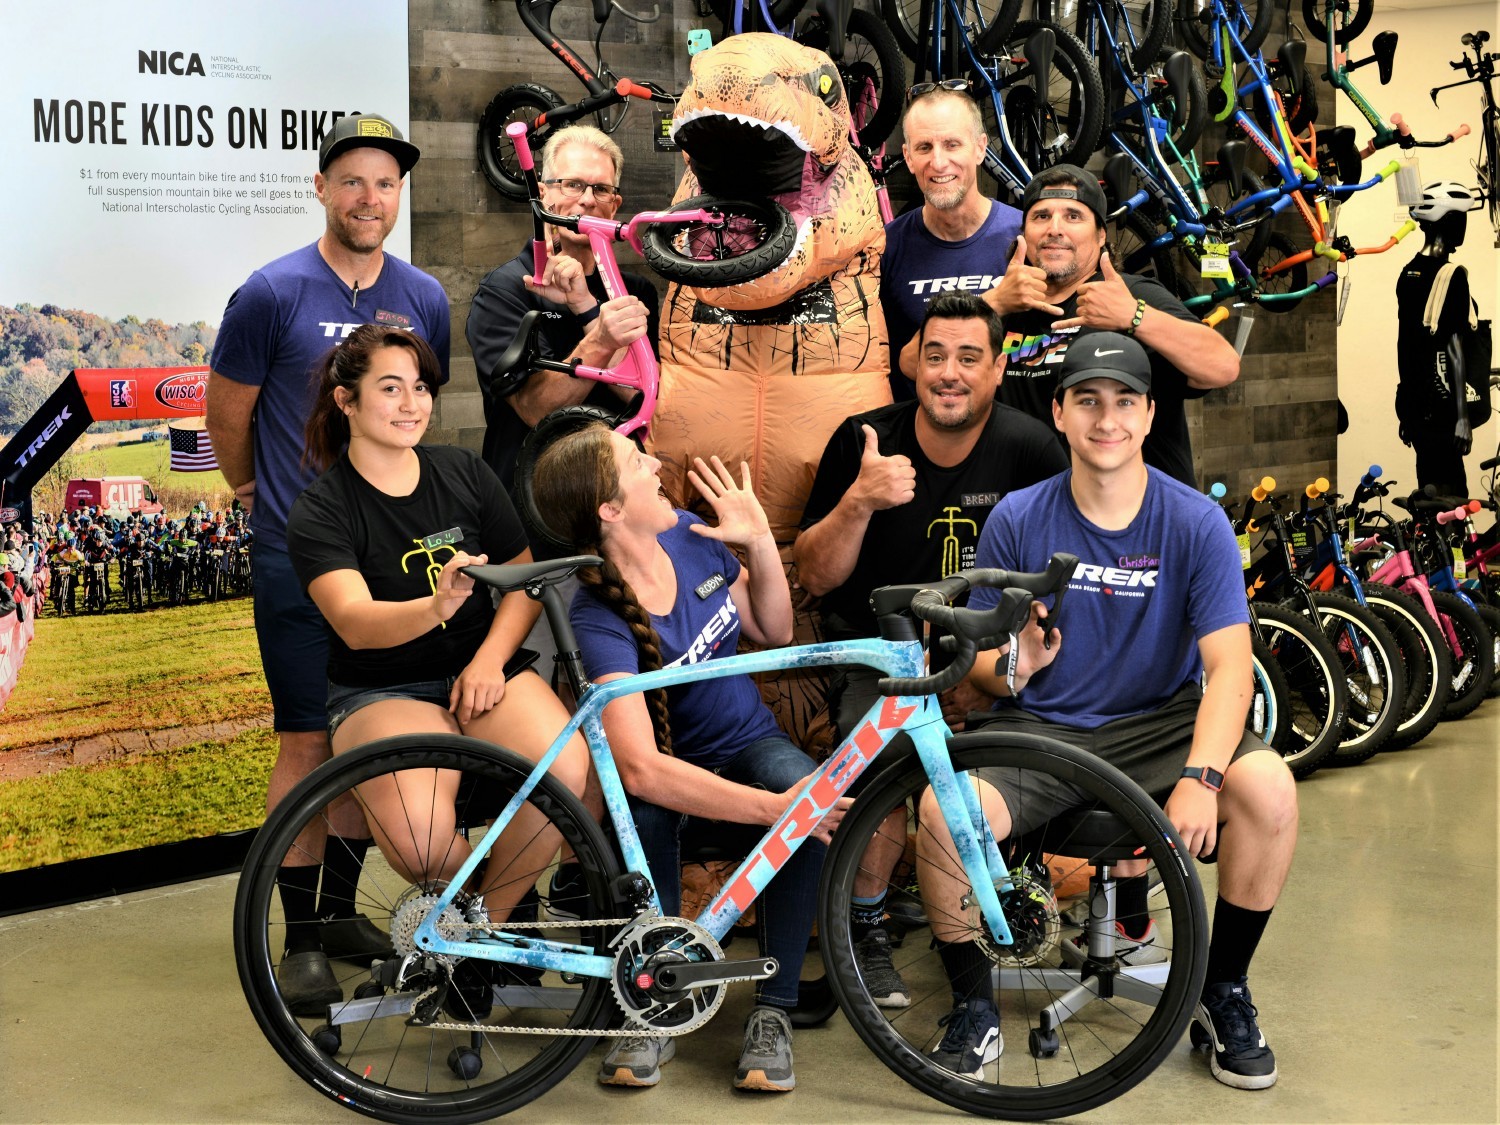 Trek bike shops are all about providing incredible hospitality and having a lot of fun along the way.